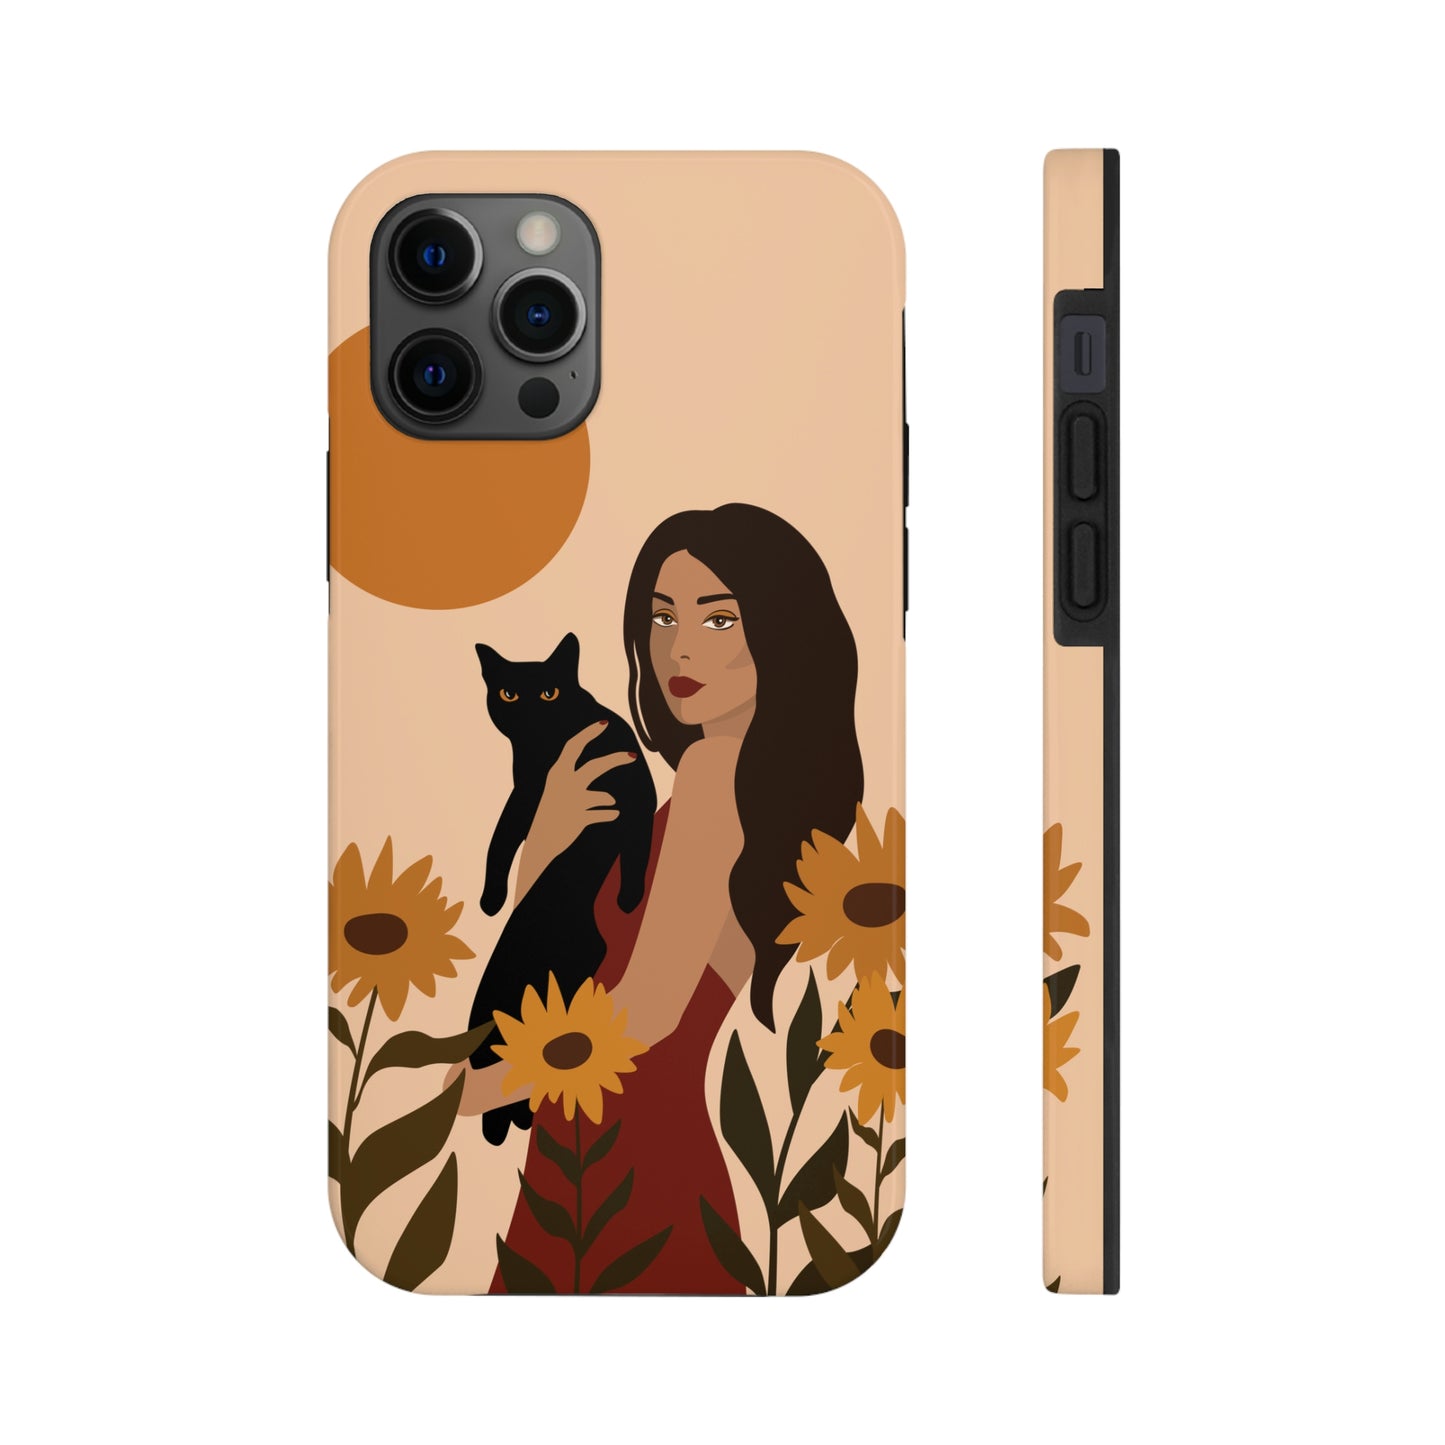 Woman with Black Cat Mininal Sunflowers Aesthetic Art Tough Phone Cases Case-Mate